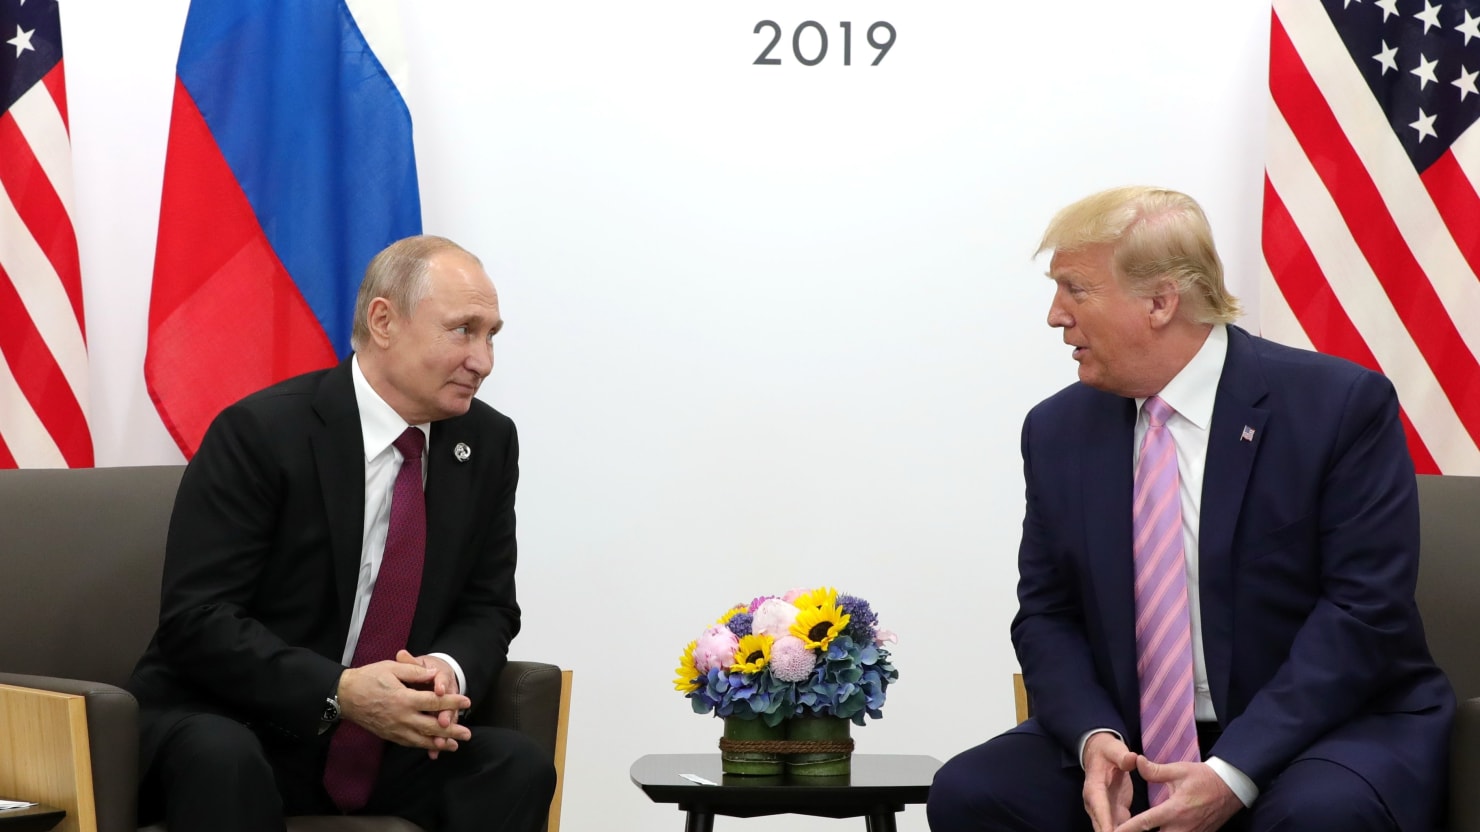 Vladimir Putin Sends His Best Wishes to Trump for a Speedy Recovery